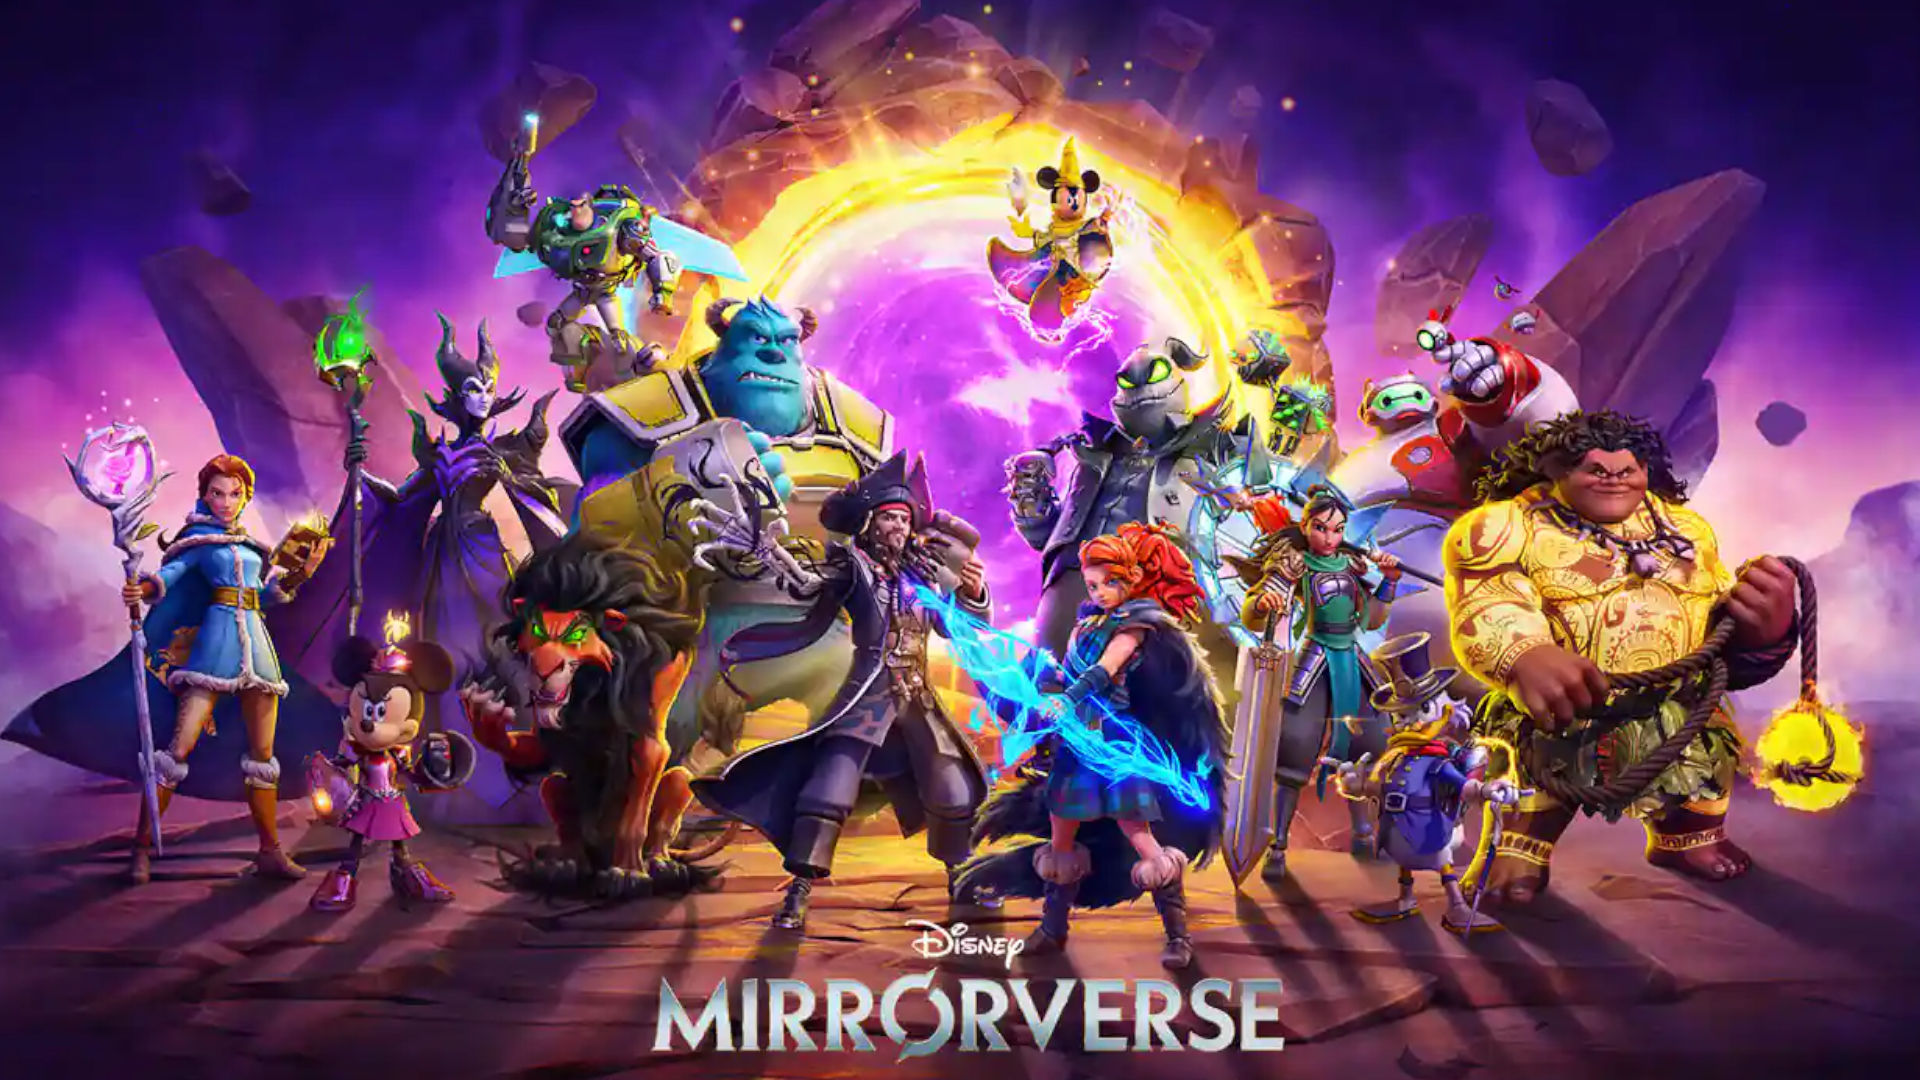 Key art for Disney Mirrorverse, one of the surprise inclusions on our list of boy games